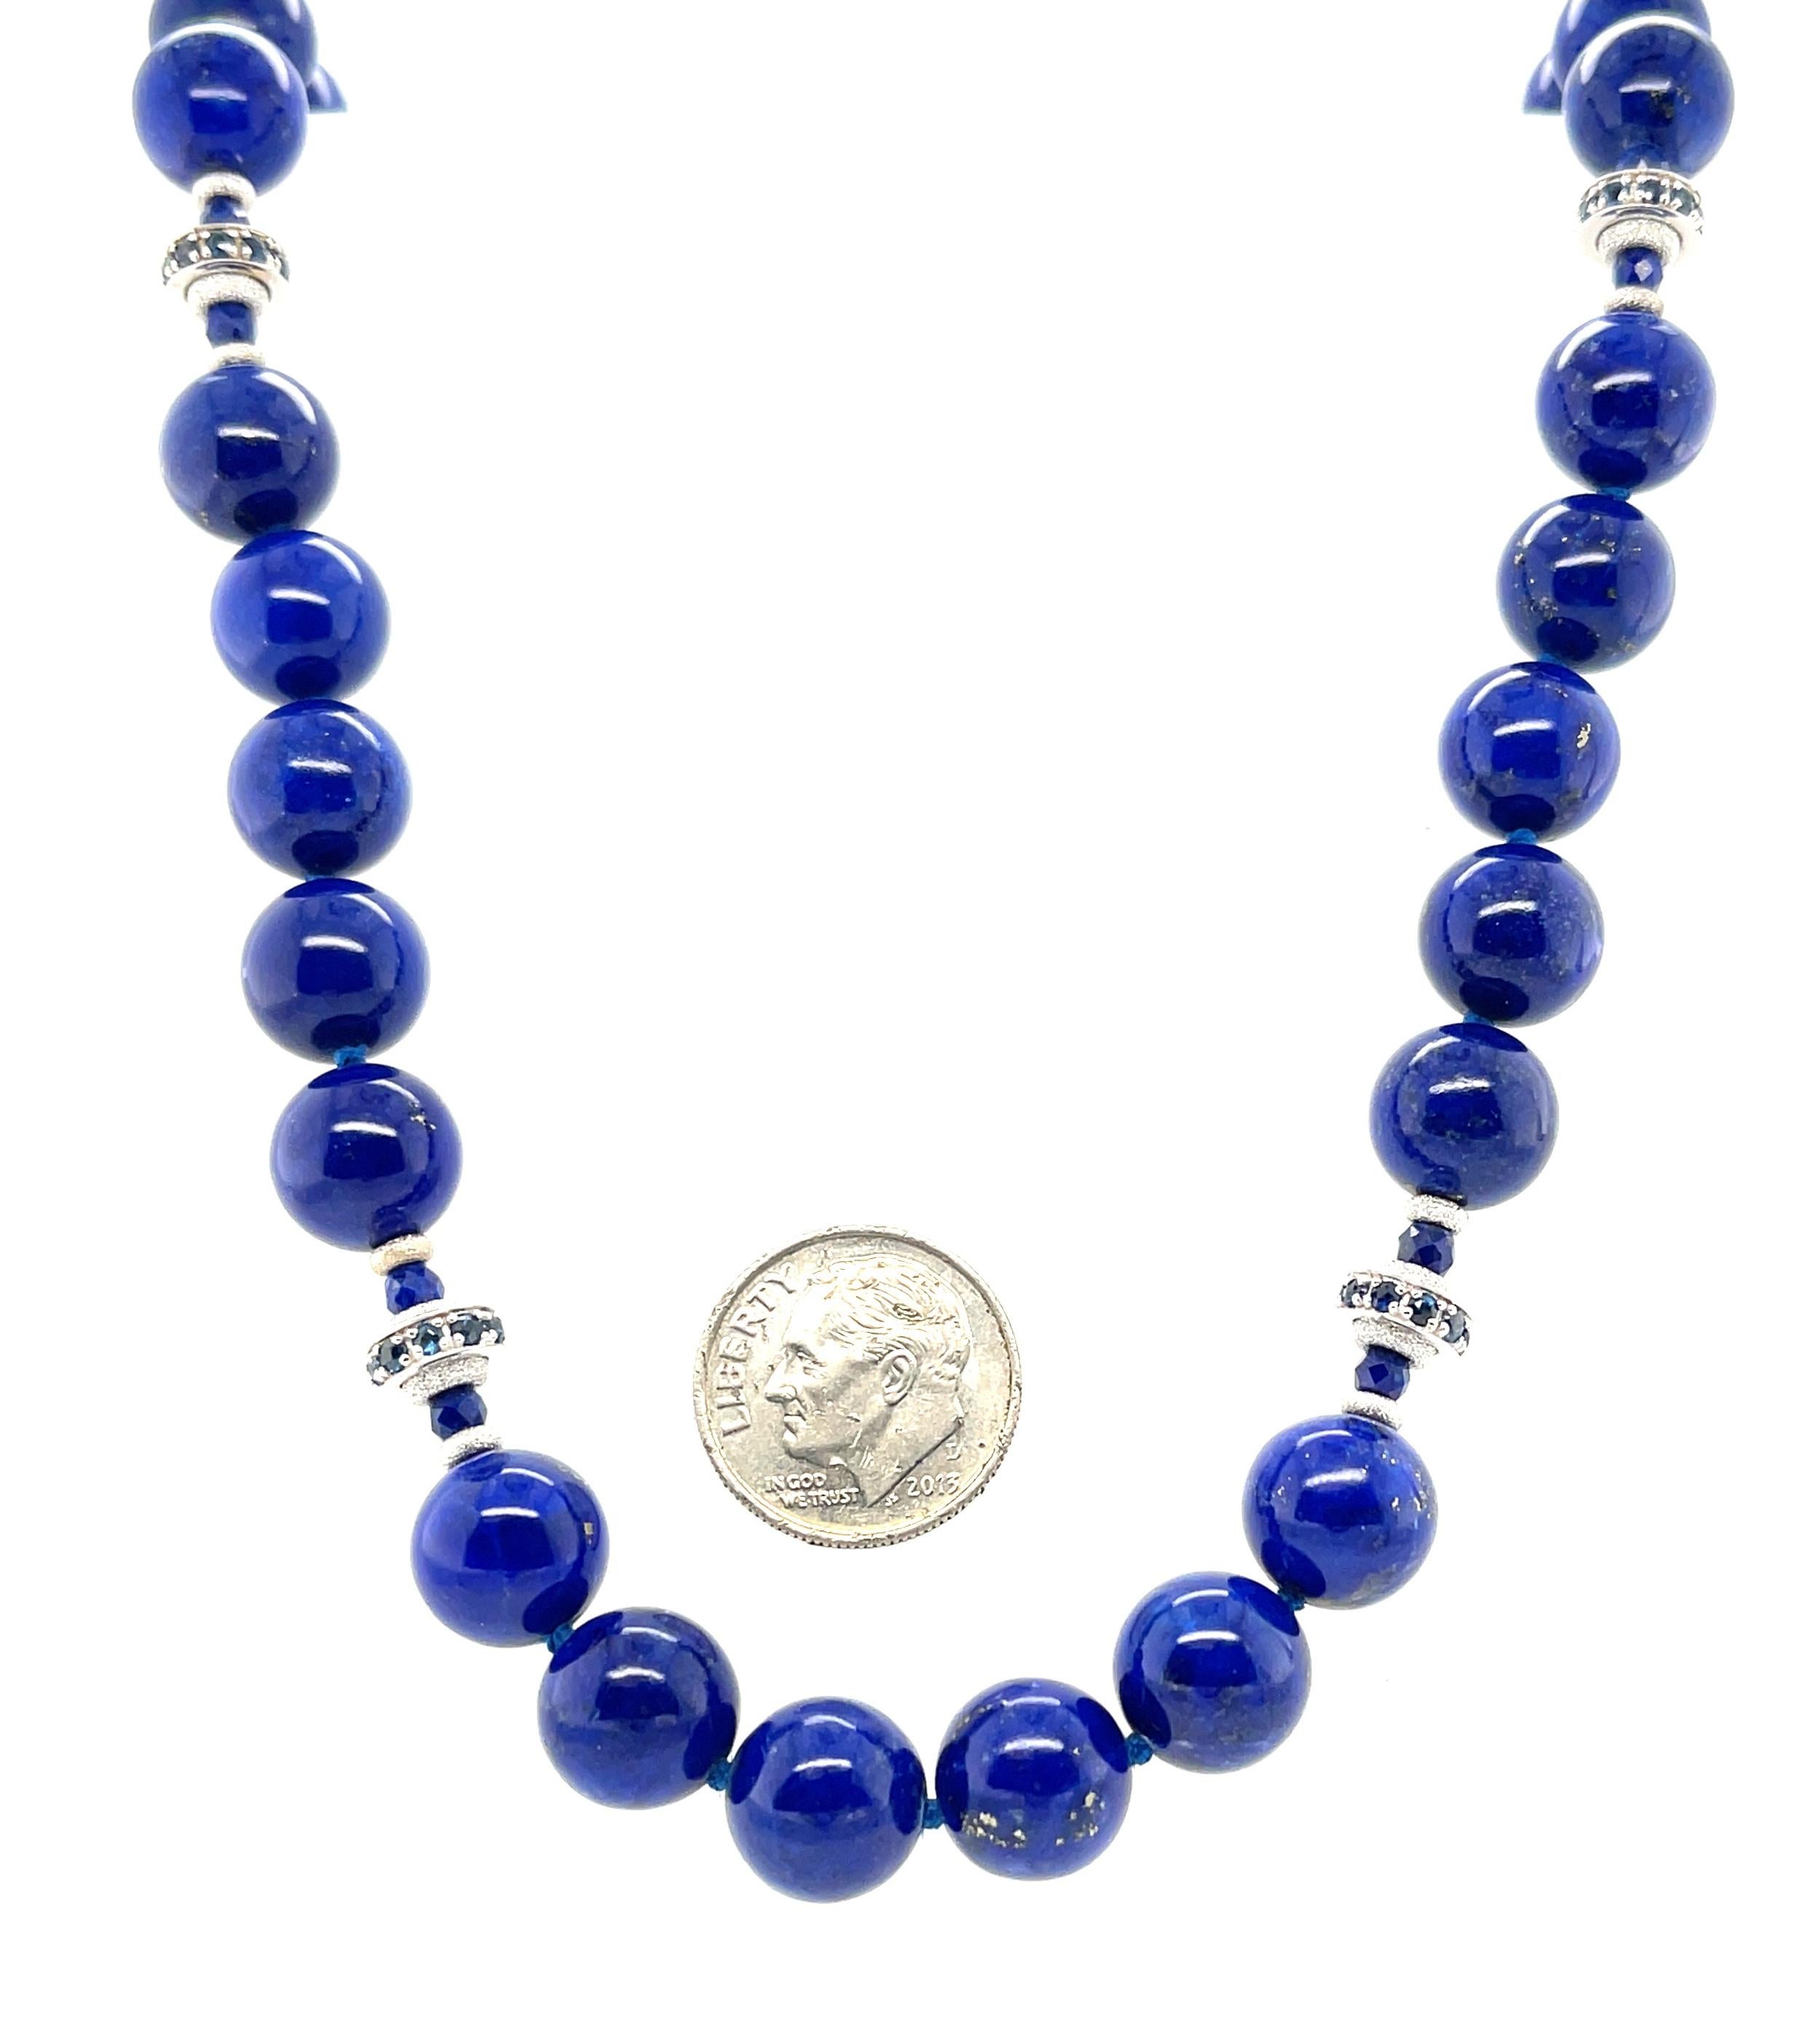 10mm Round Lapis Lazuli, Faceted Sapphire Bead & White Gold Necklace, 19 Inches In New Condition For Sale In Los Angeles, CA